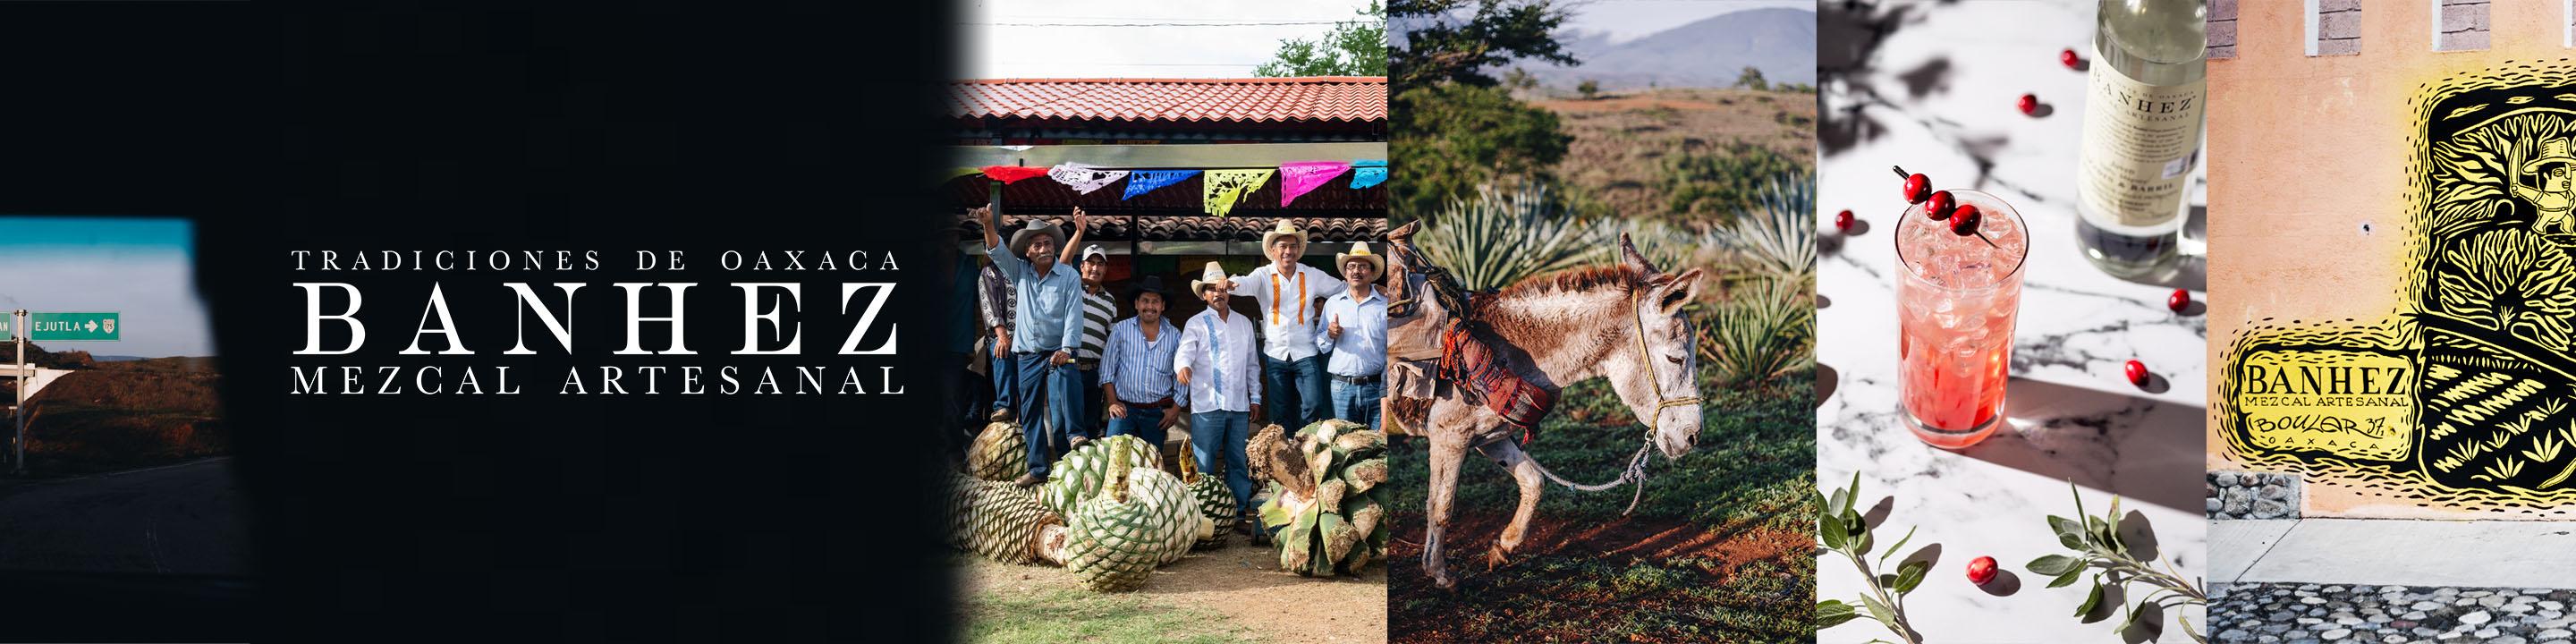 In the village of San Miguel Ejutla in the central valley of Oaxaca, a growing Co-operative of over 36 families produces Banhez Mezcal. The farming families and mezcaleros work as one to make sustainable, fair trade mezcal as their ancestors have done for generations.